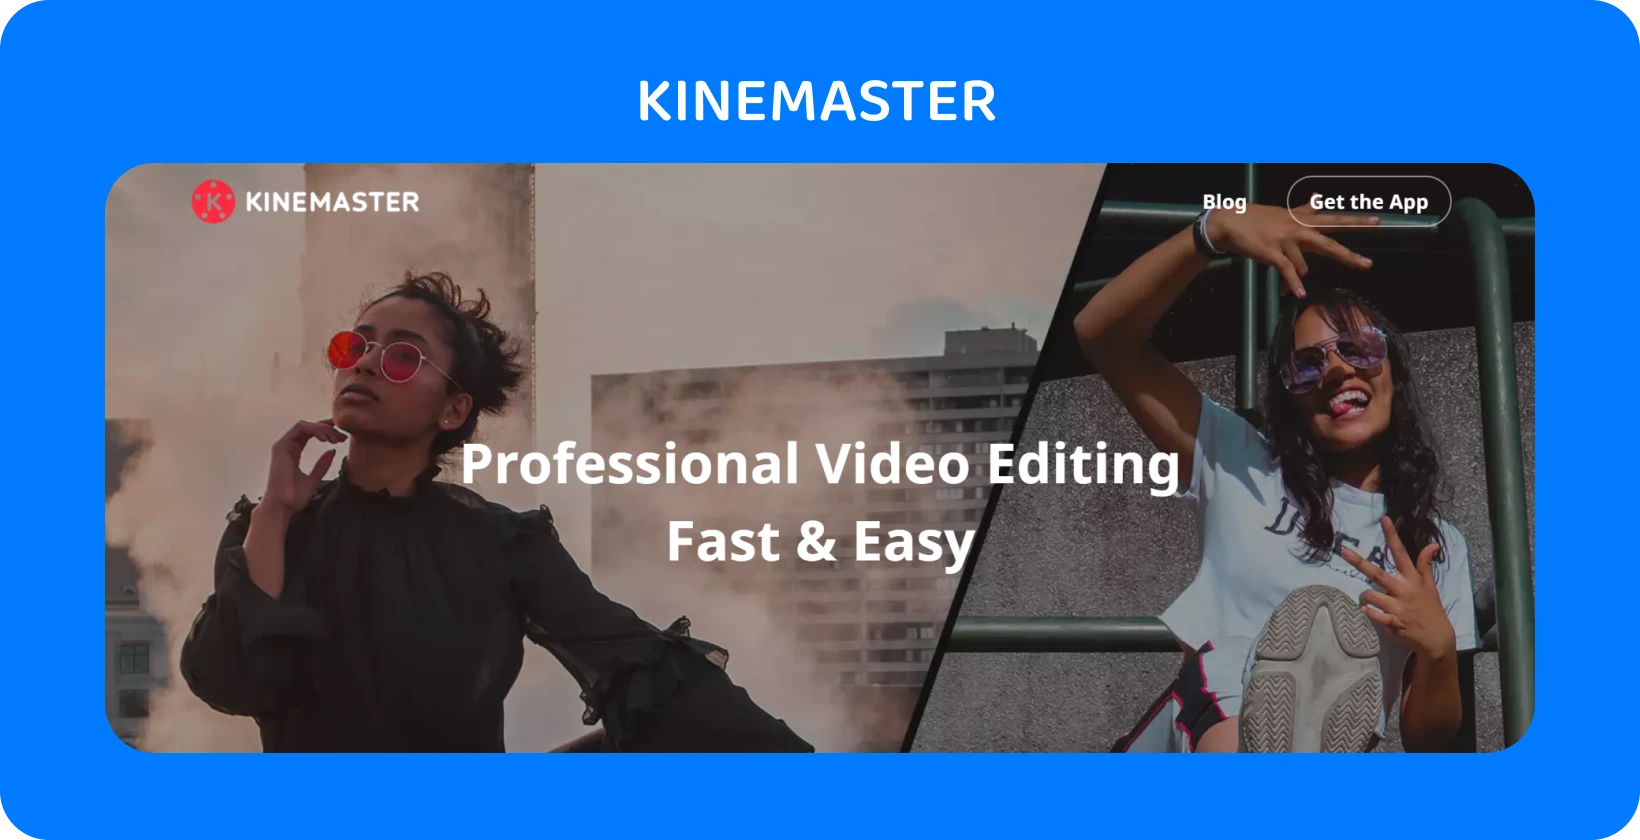 KineMaster app advertisement with two models posing, highlighting professional video editing that is fast and easy.